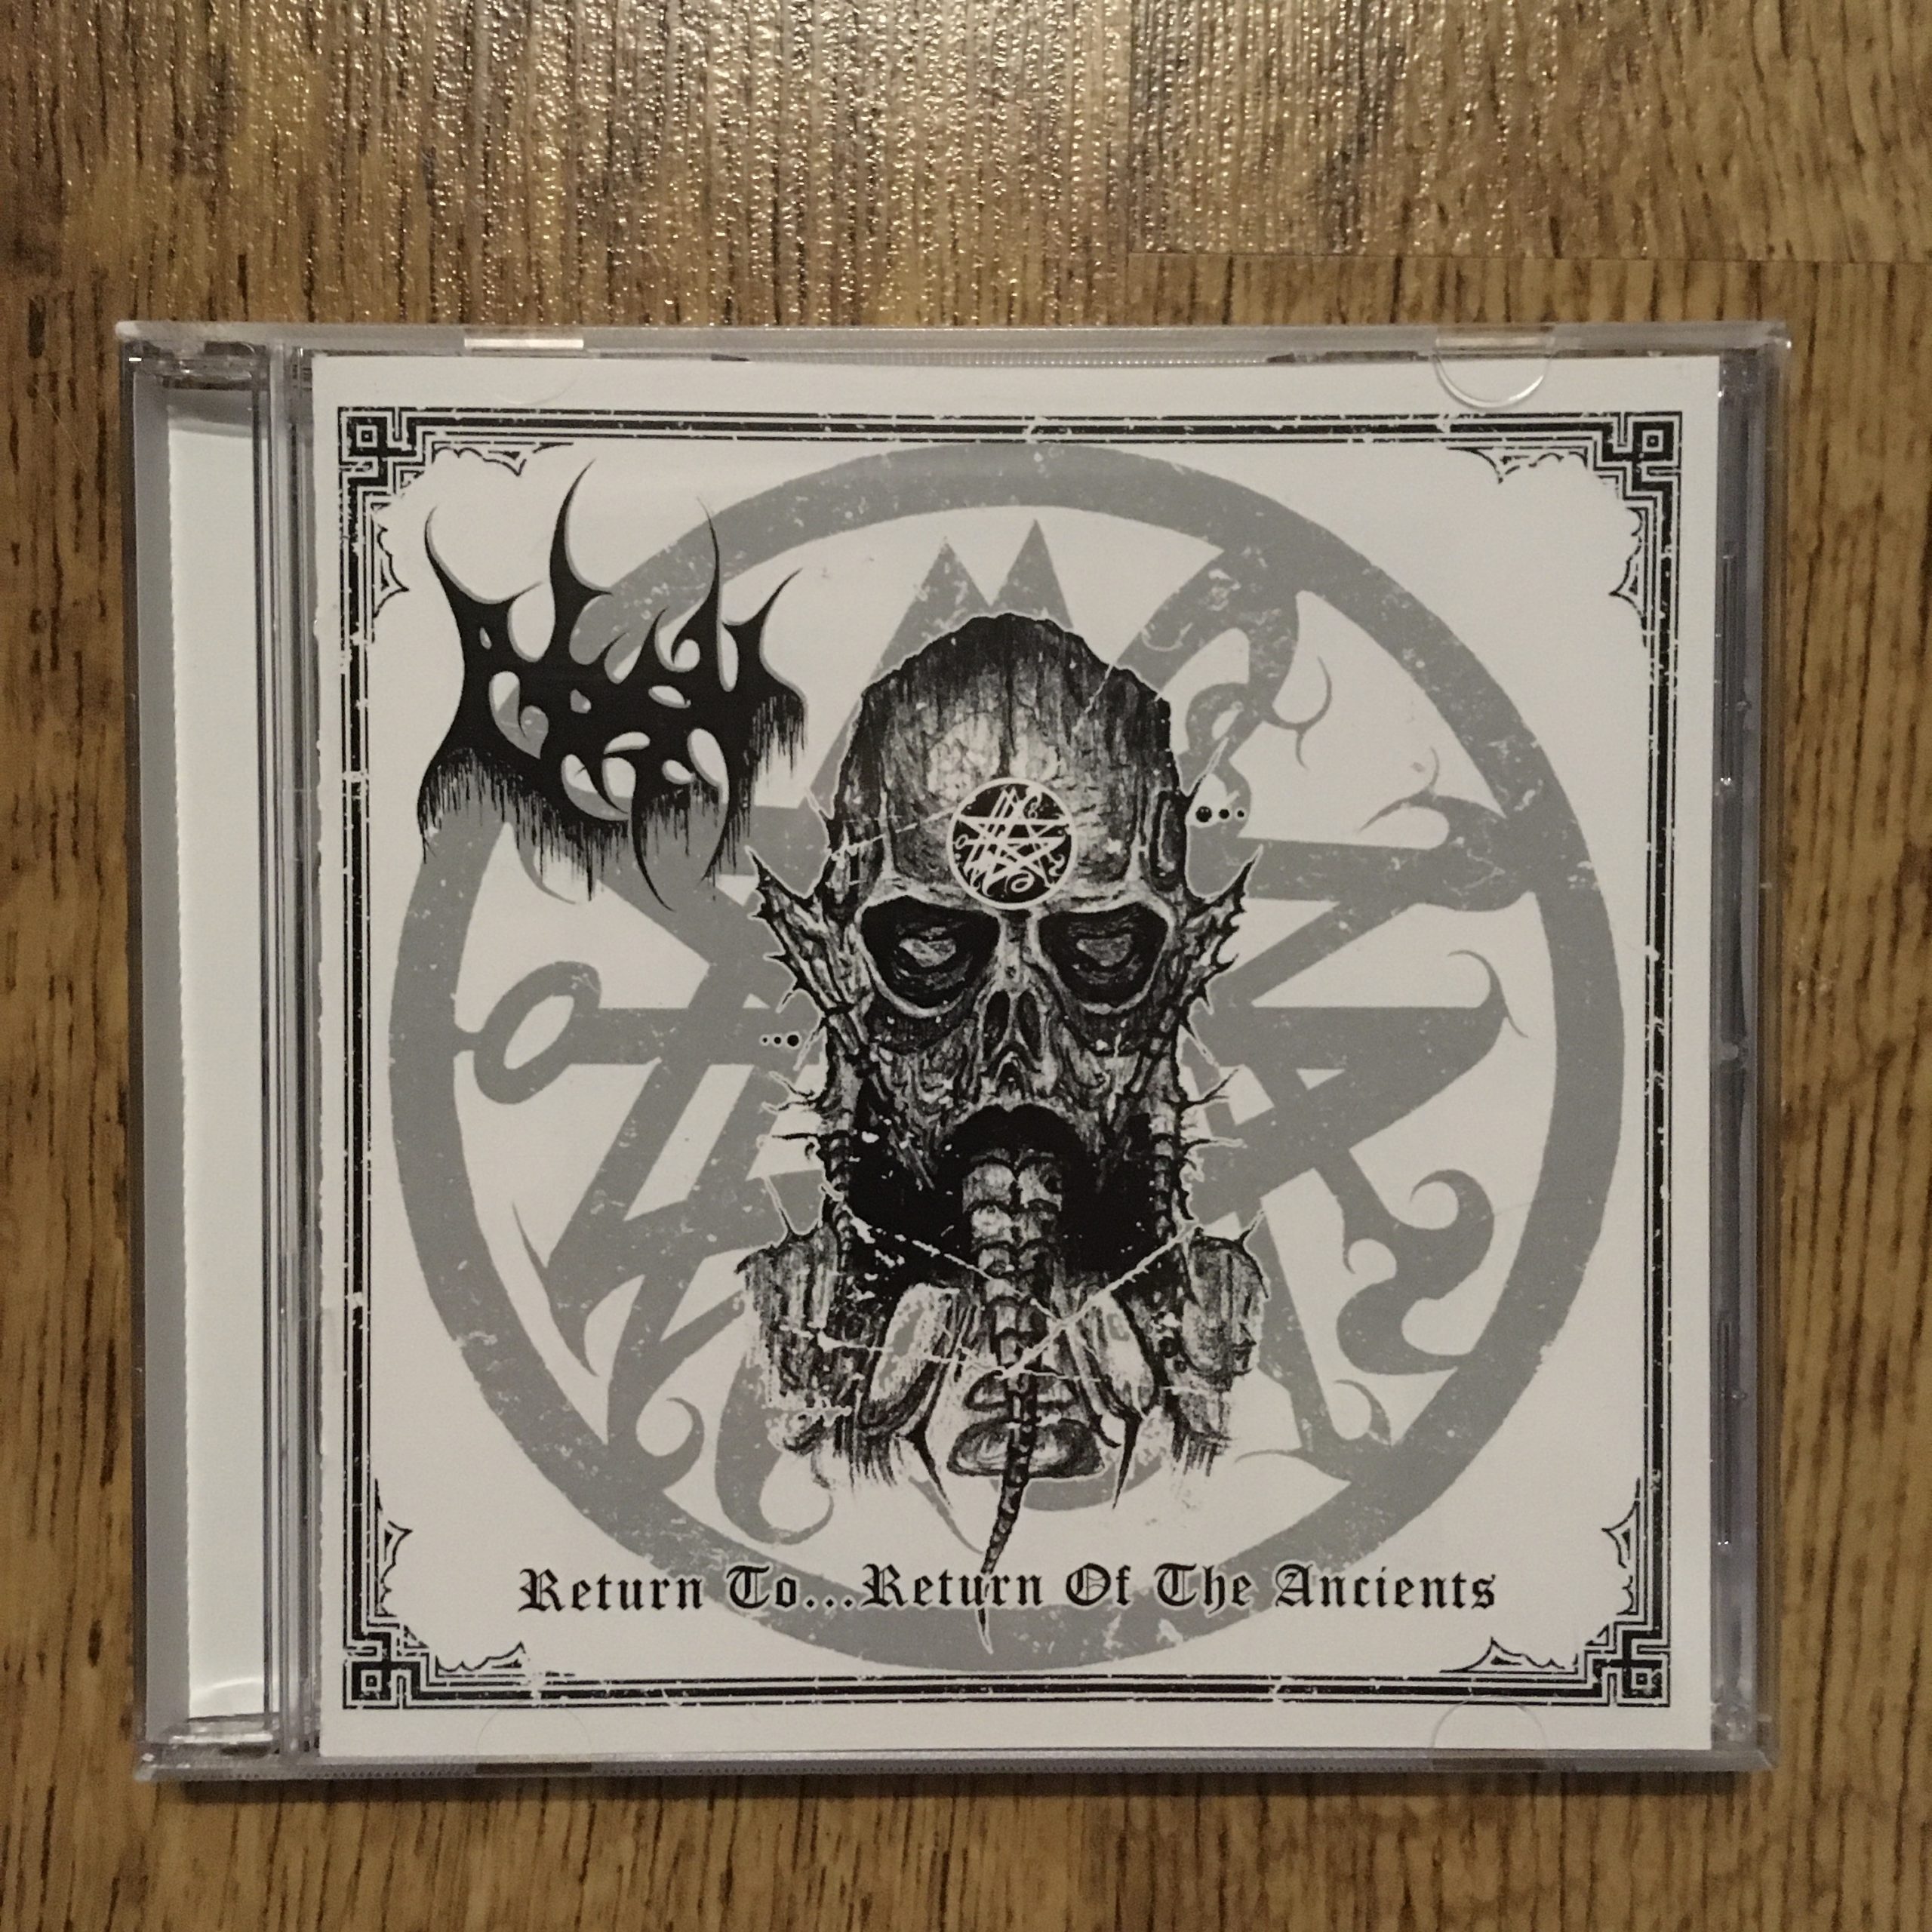 Photo of the Absu - "Return to... Return of the Ancients" 2CD